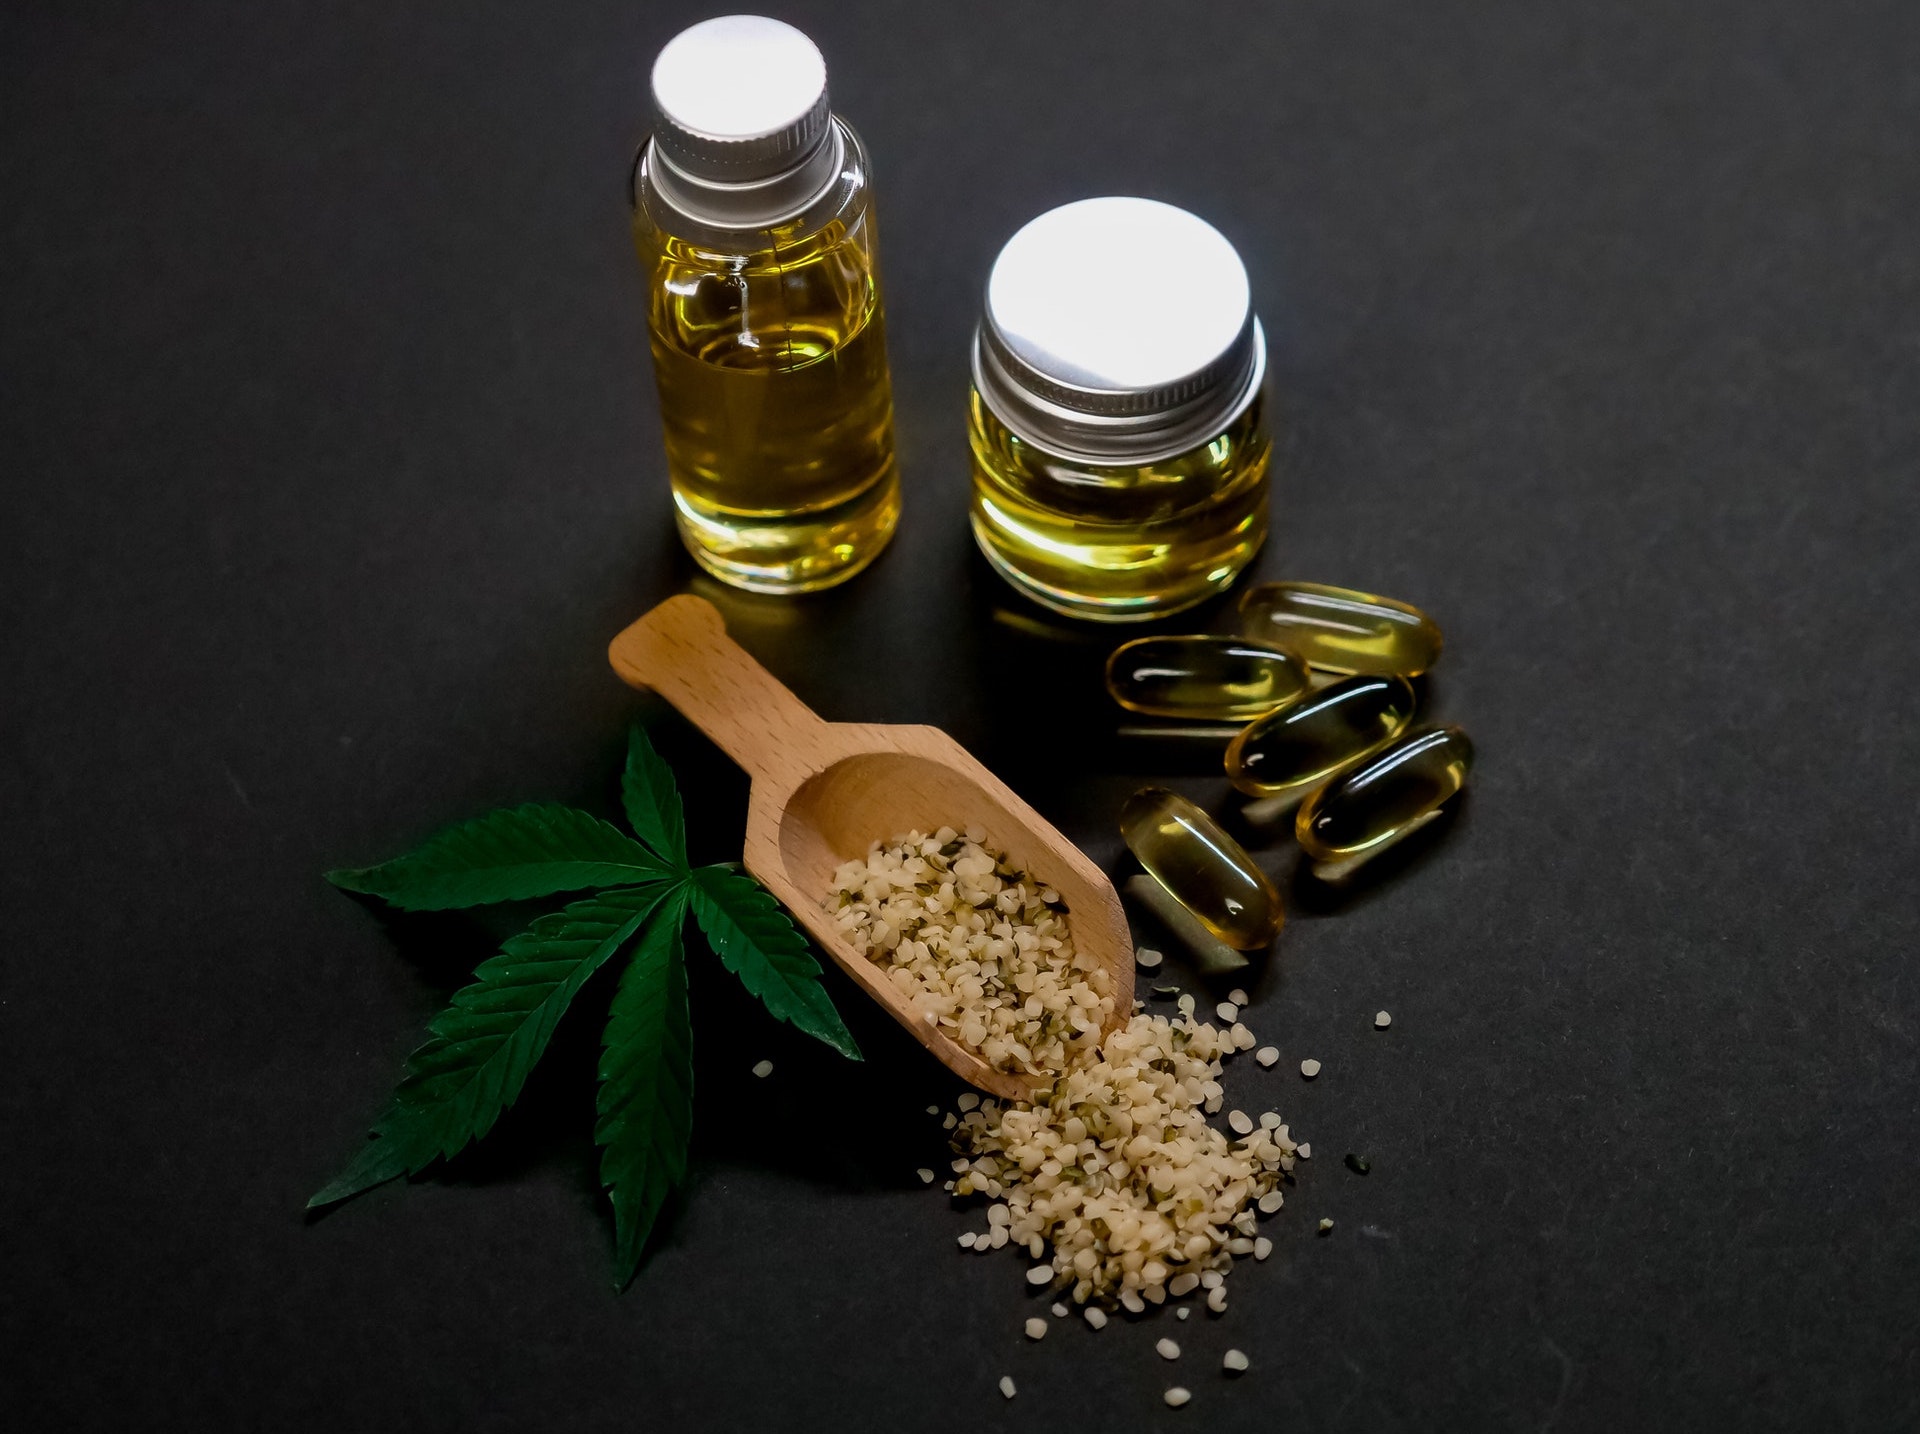 How is CBD Oil Made? An Overview of CBD Oil Extraction